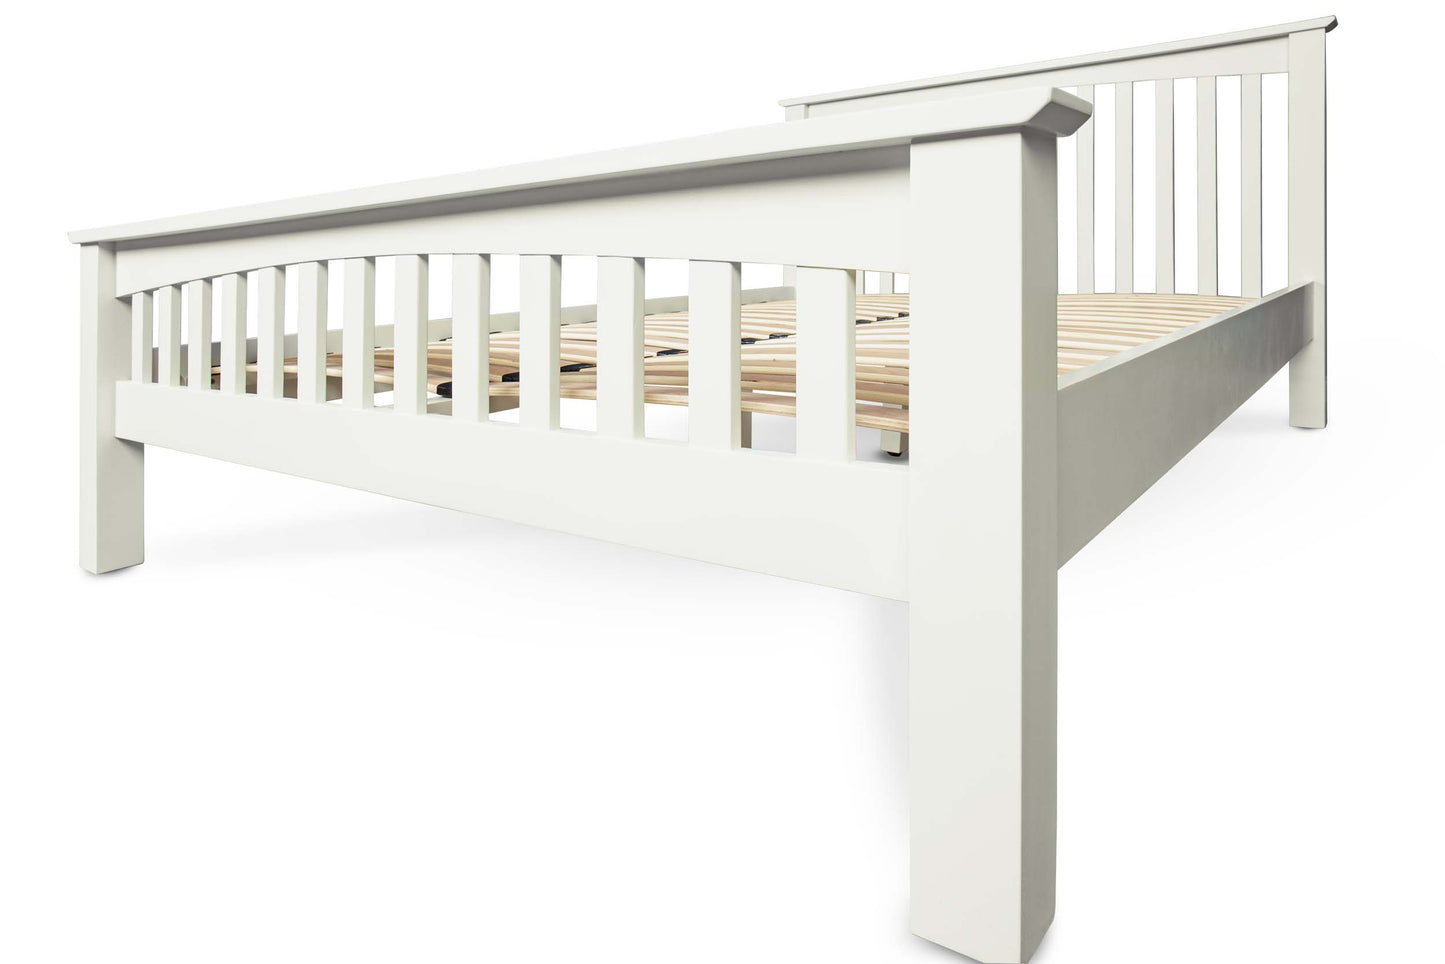 Brantham Bed Frame - 4ft Small Double - Soft White